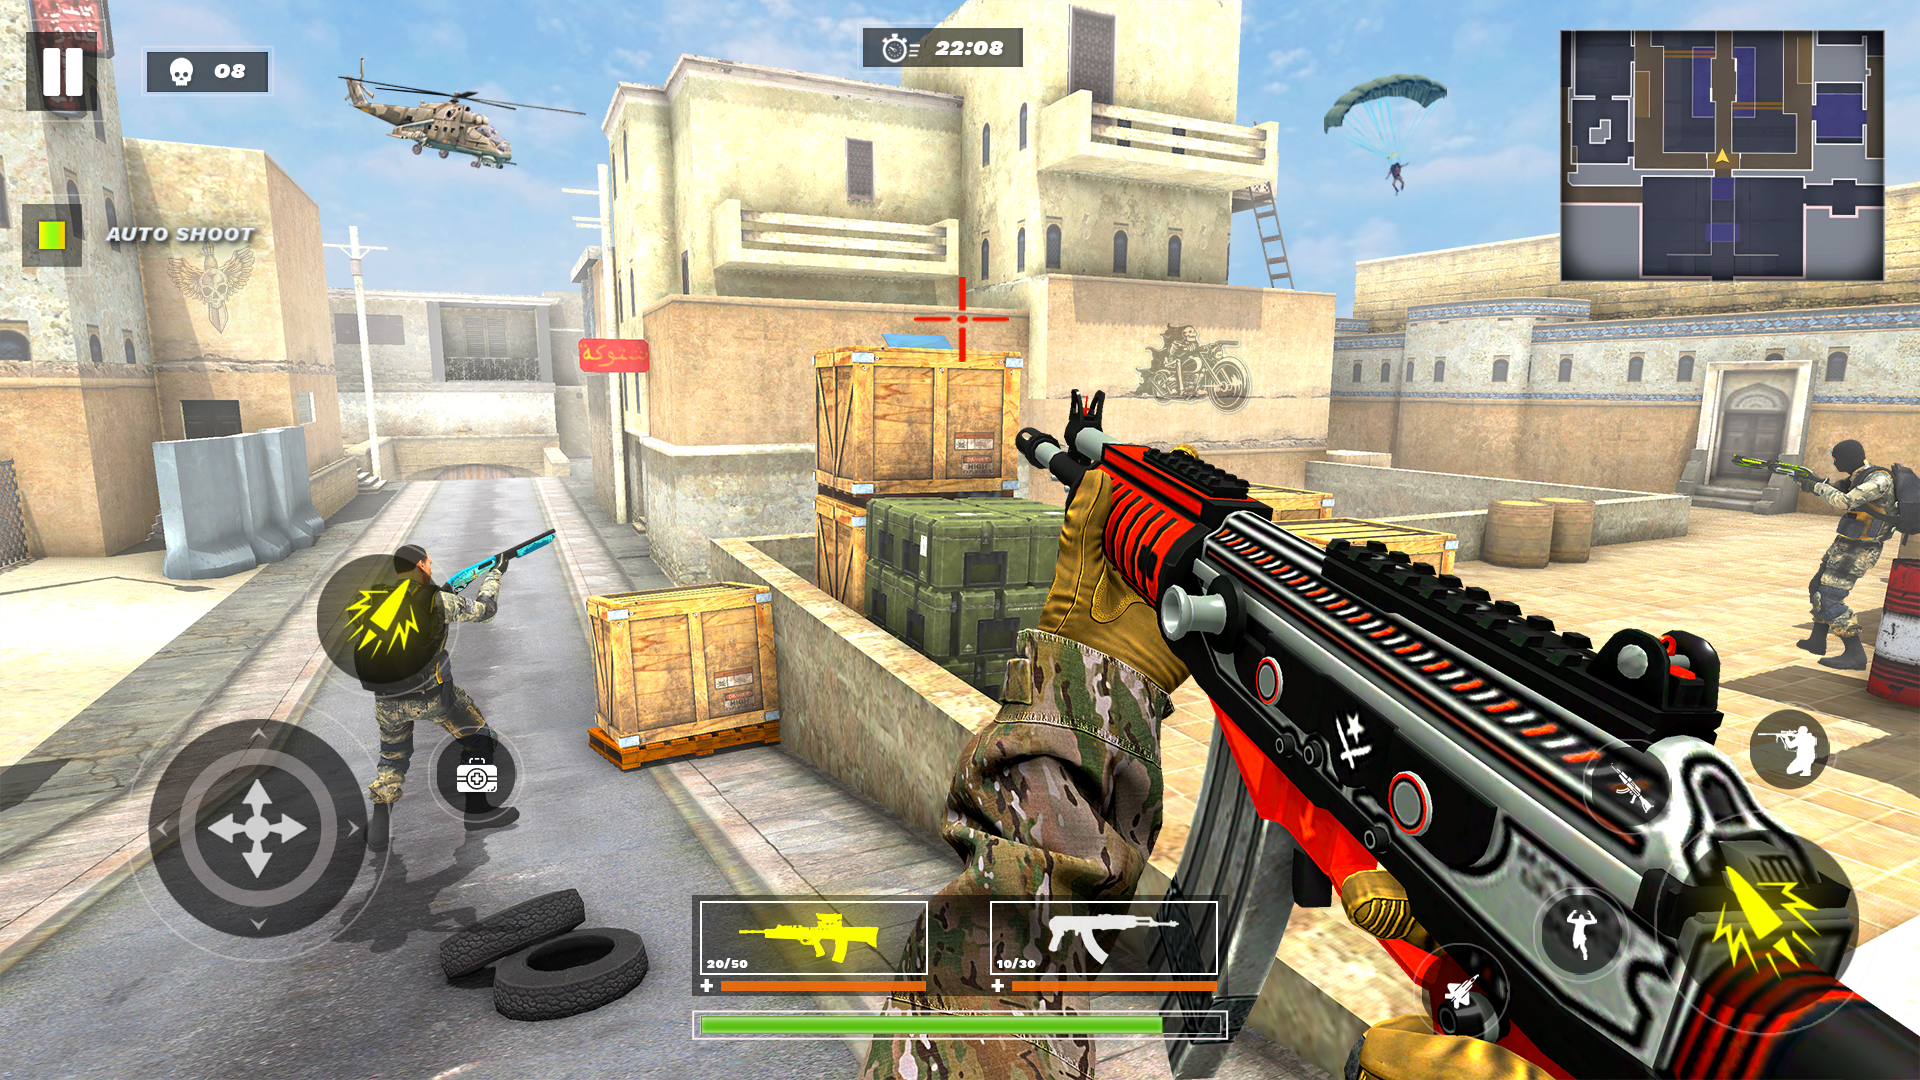 Download do APK de Guide Counter Strike Global Offensive para Android